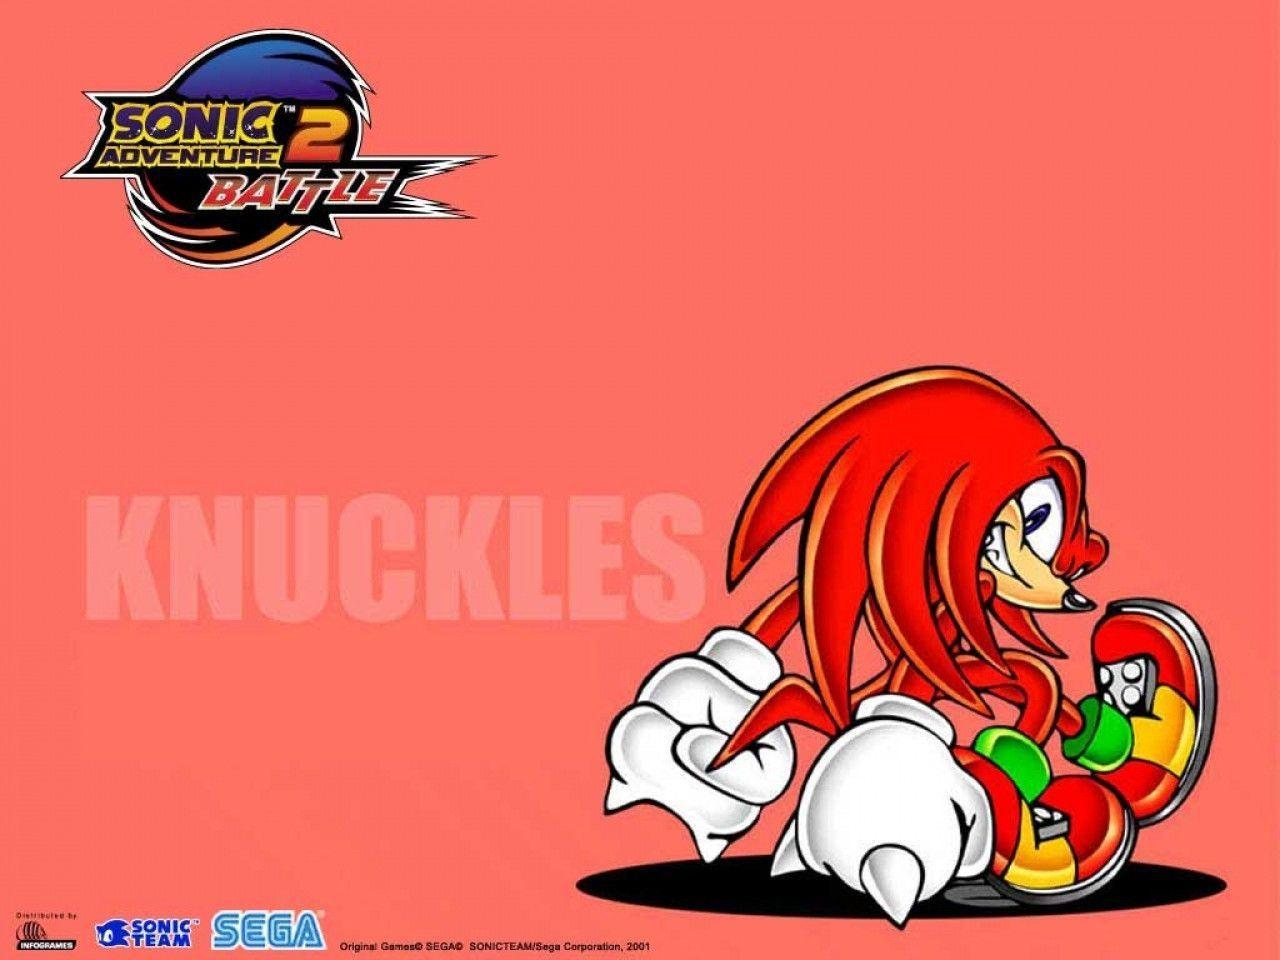 Free Sonic Adventure 2 Knuckles Fun Wallpaper Download Background